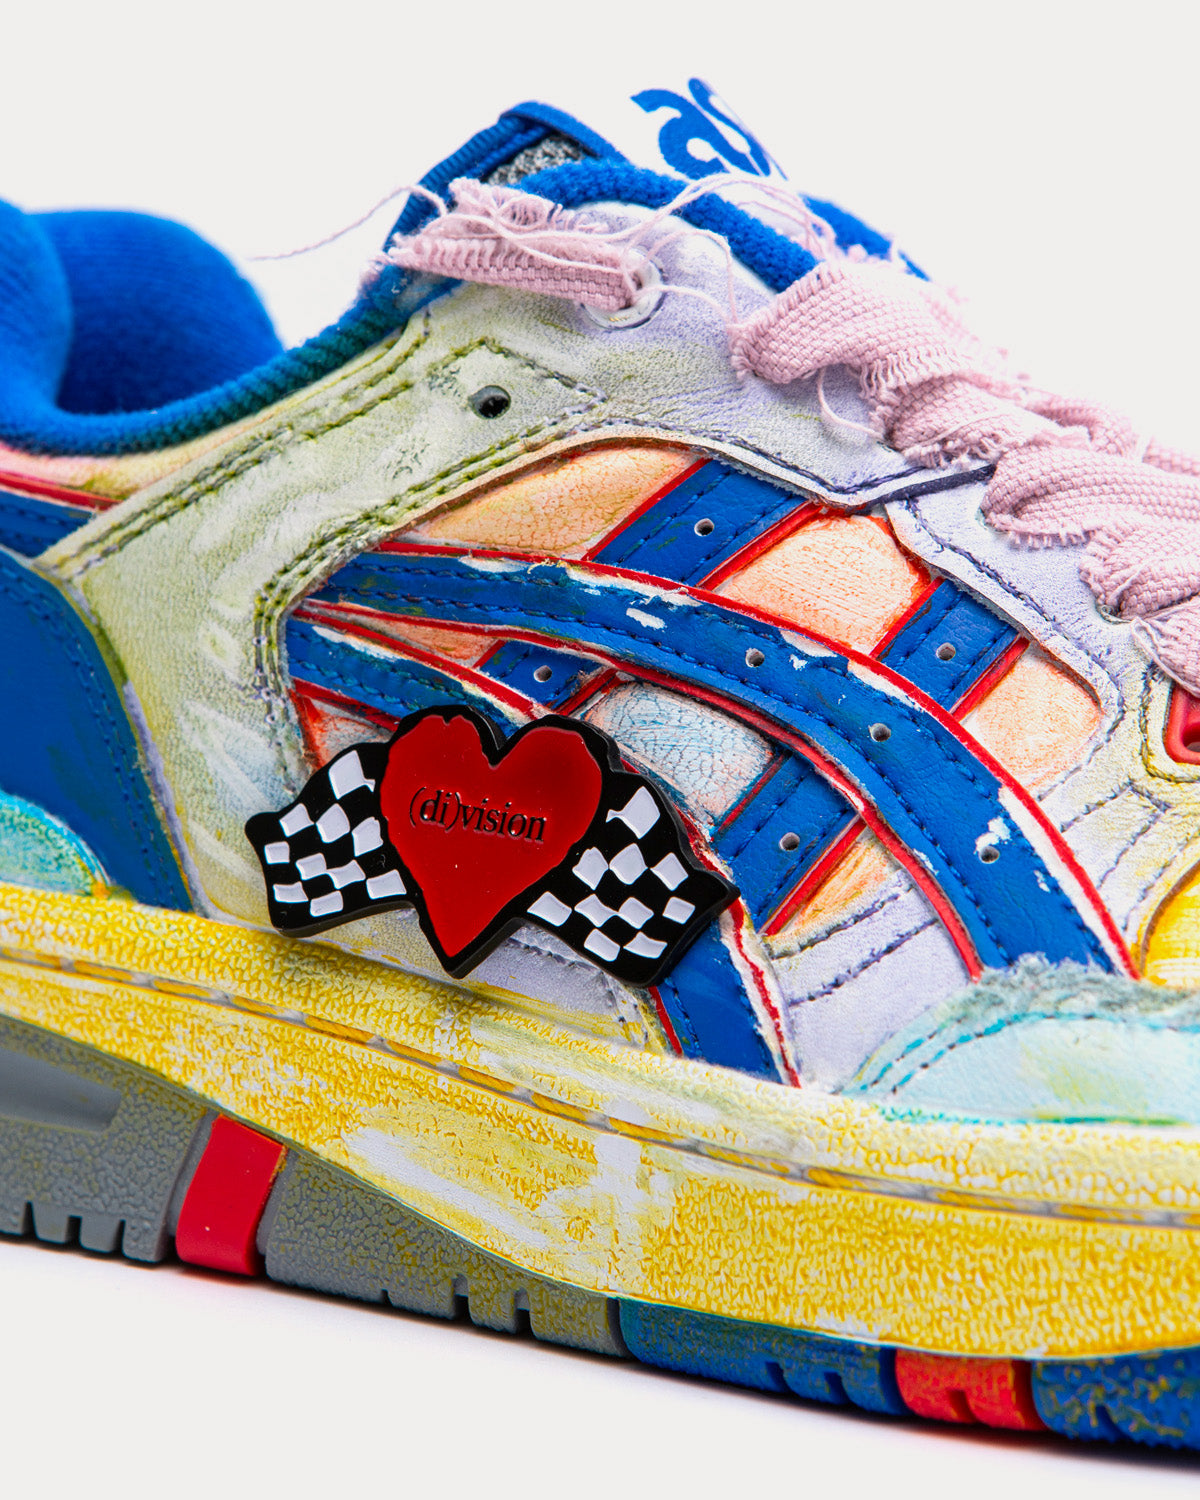 Asics x (di)vision - EX89 Rainbow / Pink / Blue Low Top Sneakers